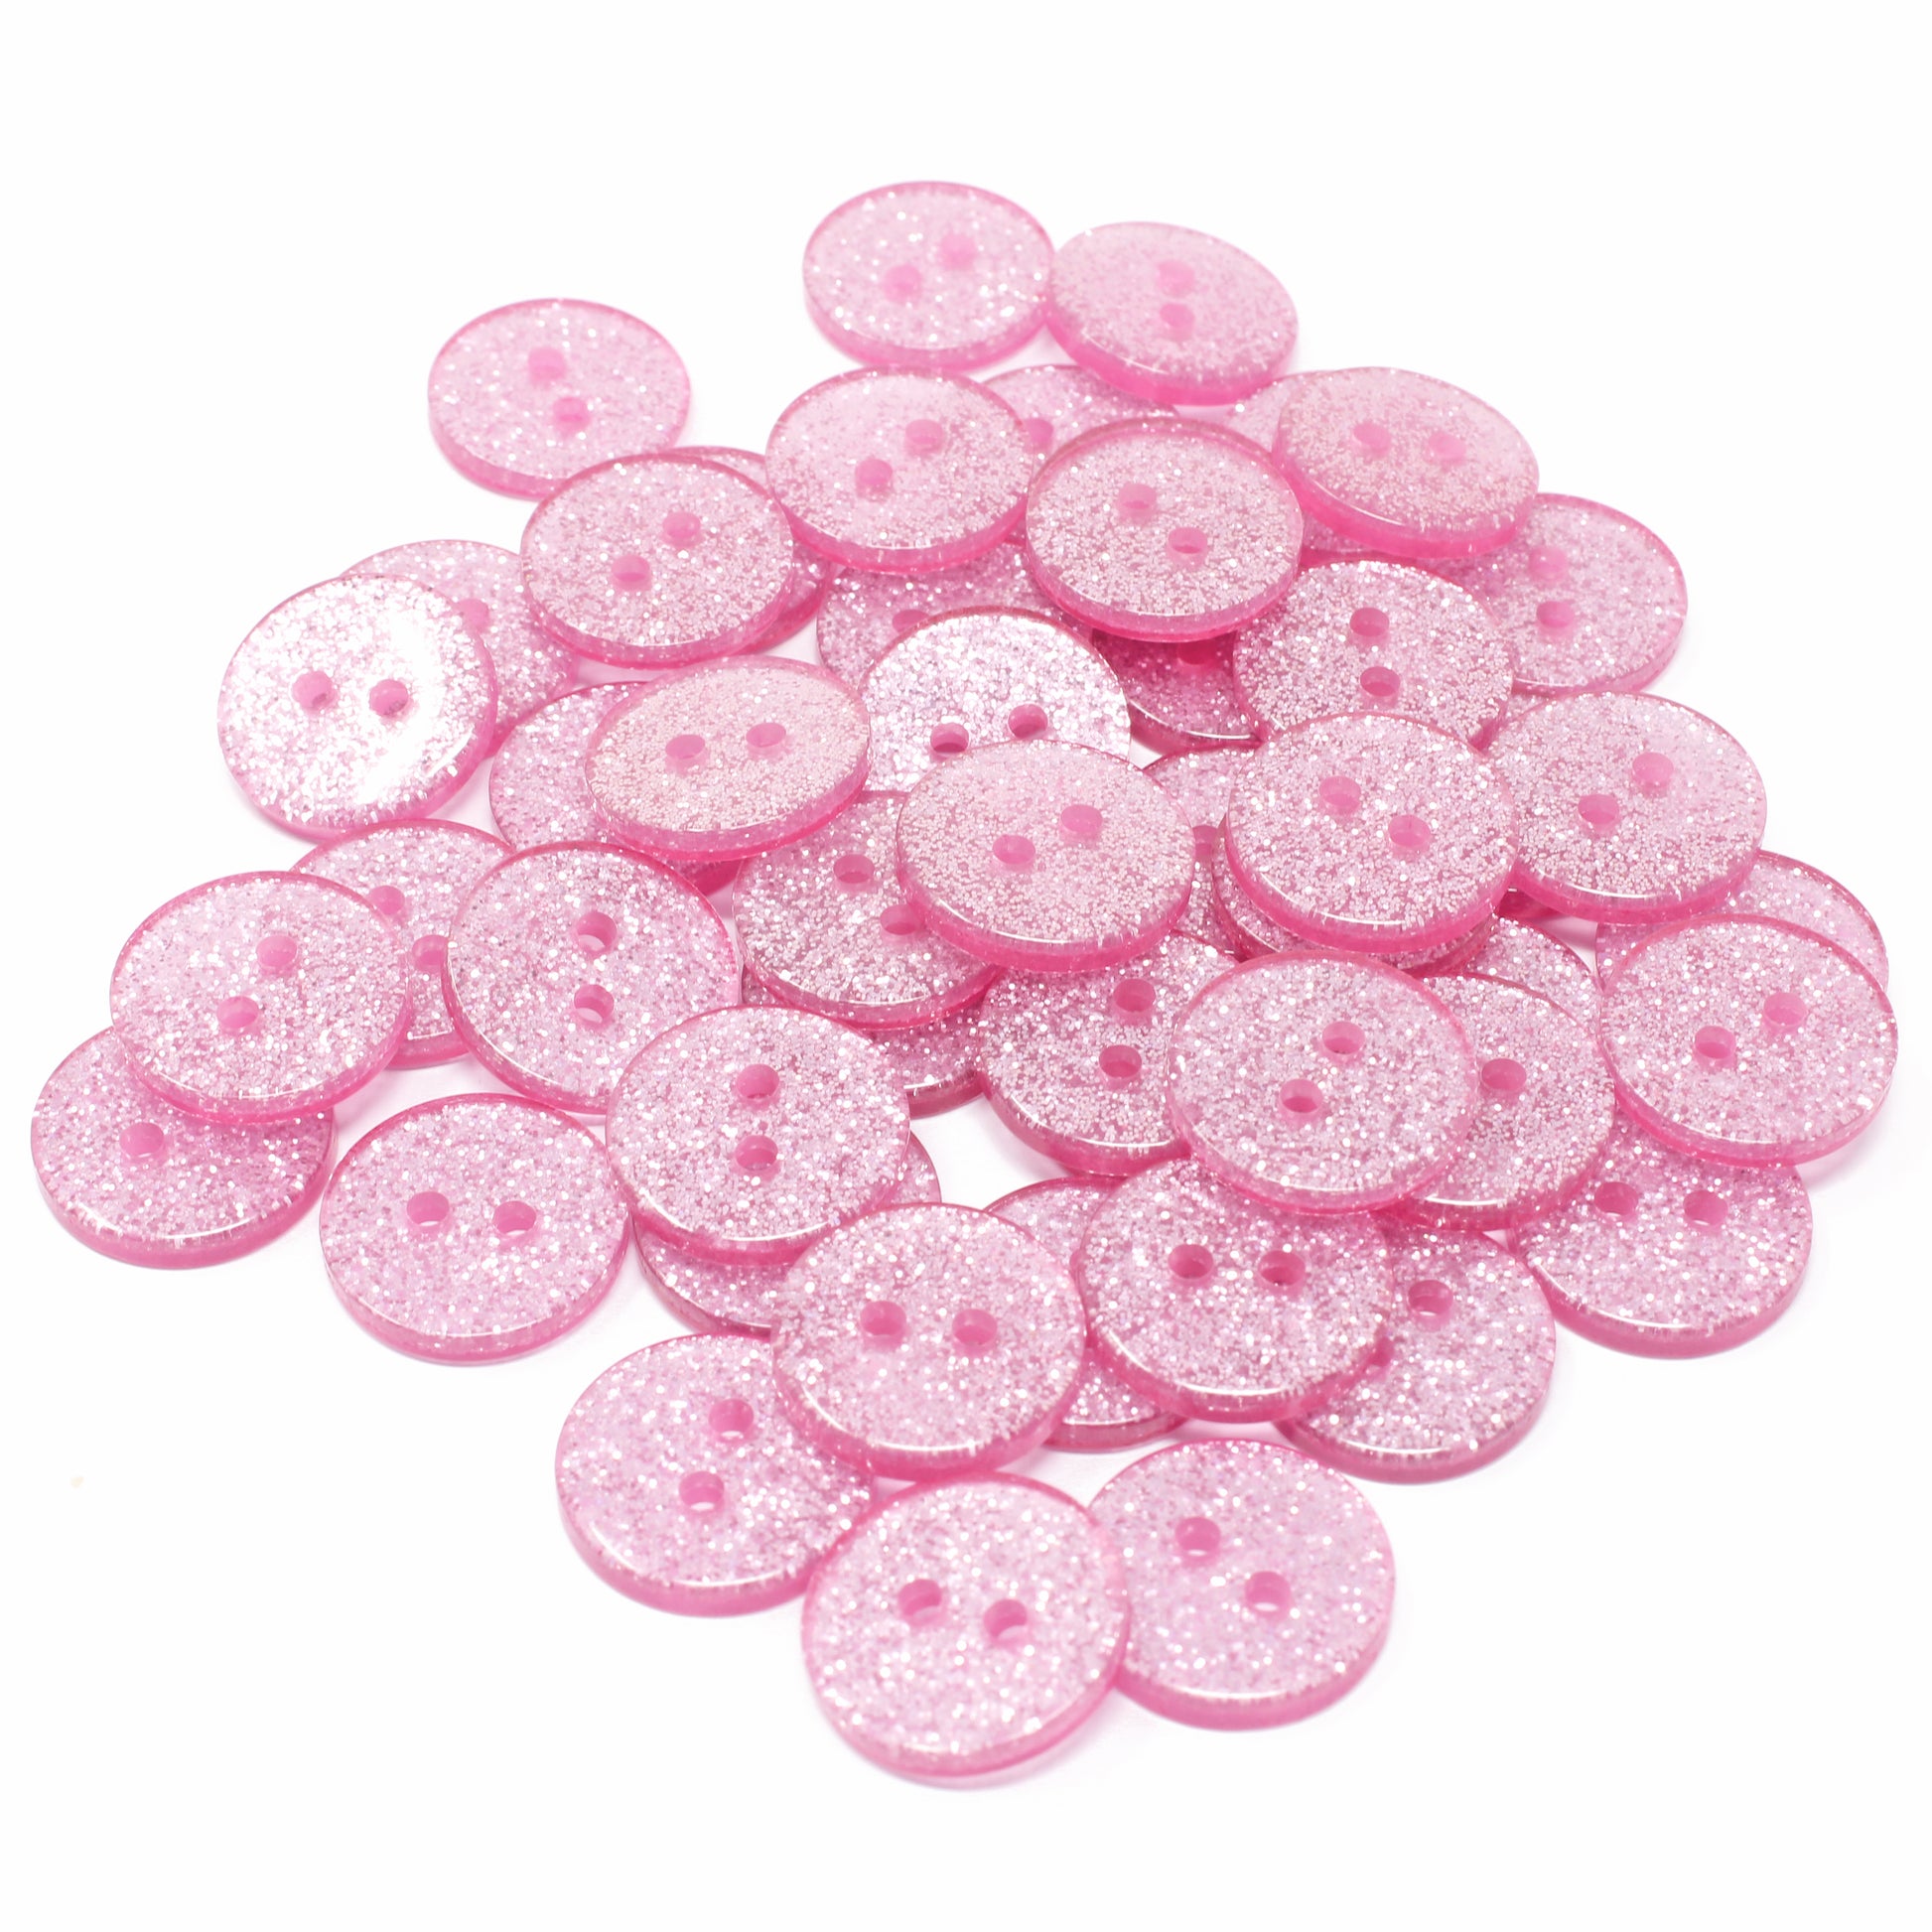 Pink 50 Mix Glitter Round 15mm Resin Buttons